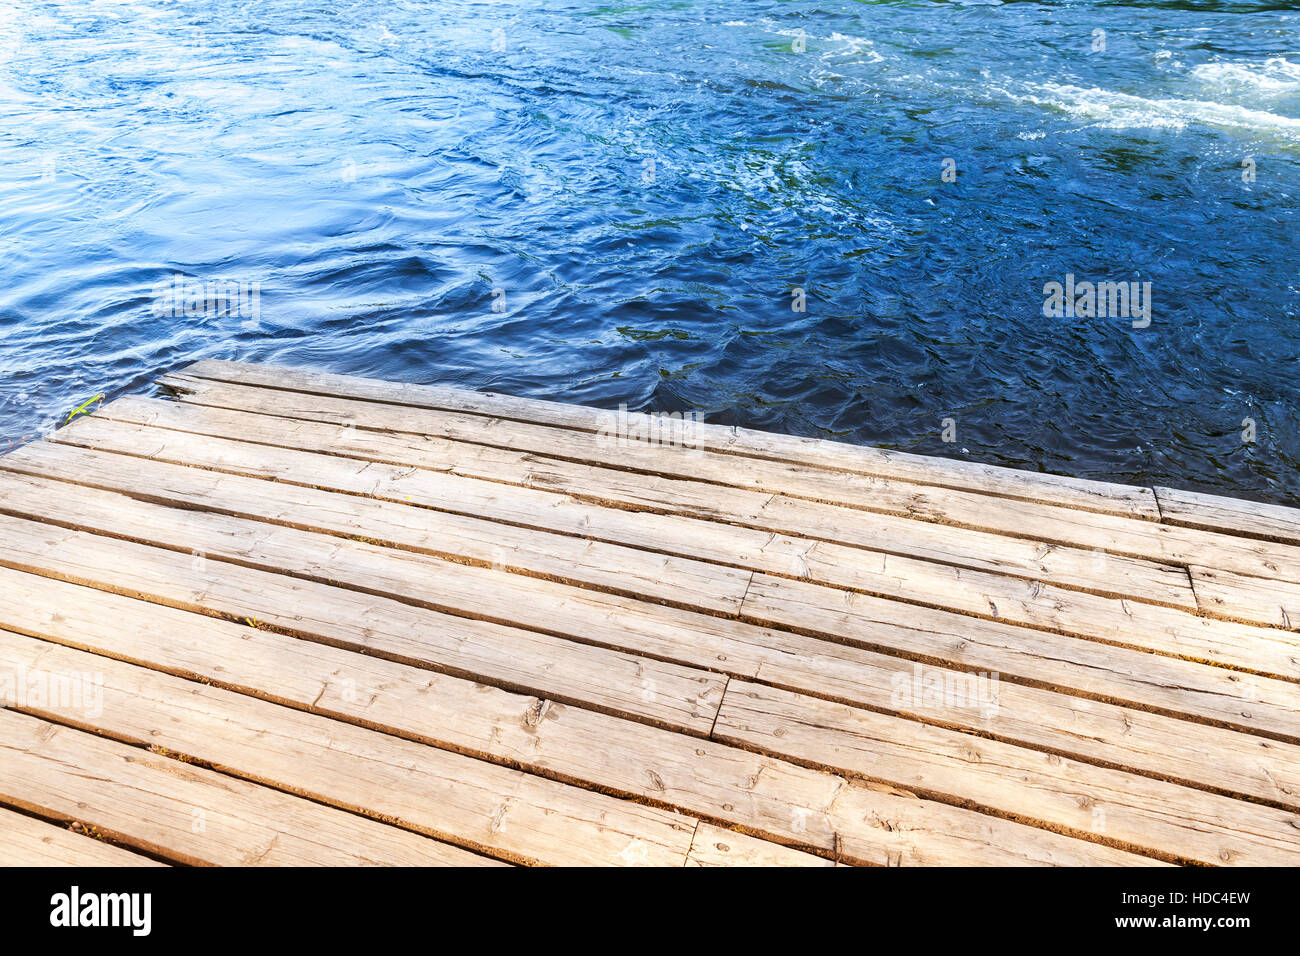 Corner of an old wooden pier with blue river water on a background Stock Photo